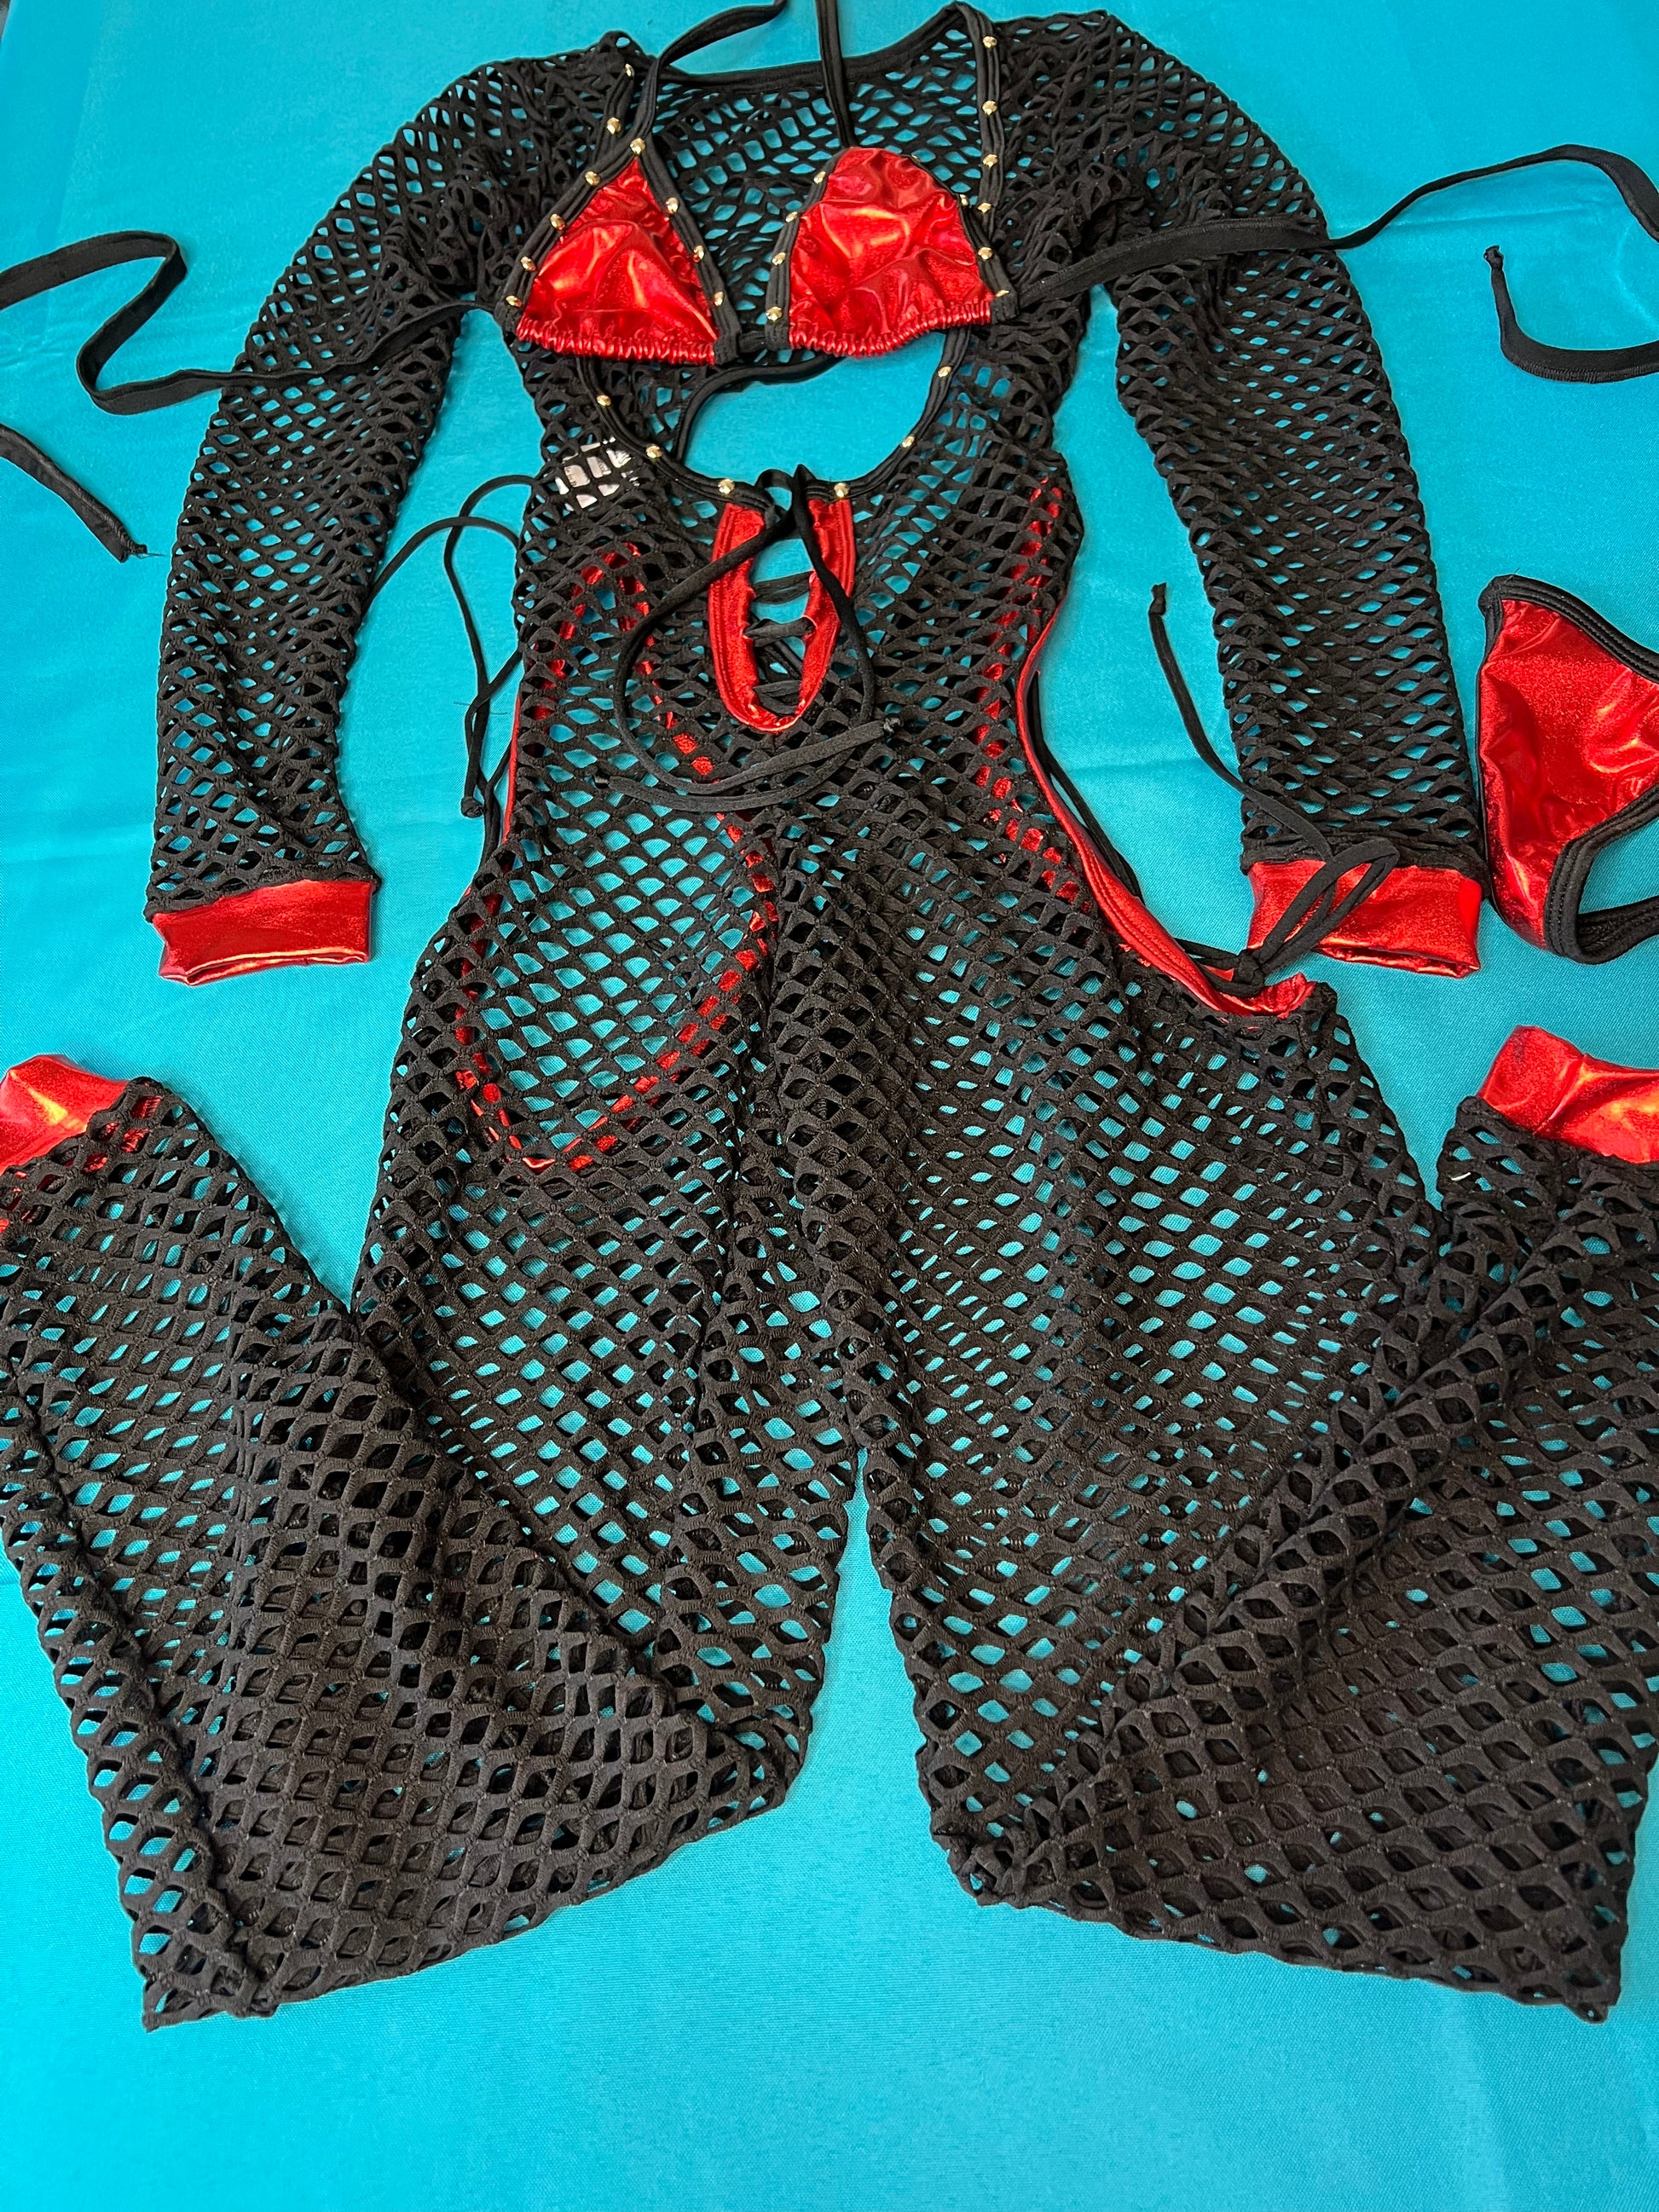 Metallic Red And Black Stunning Fishnet Body Suit Dance Wear